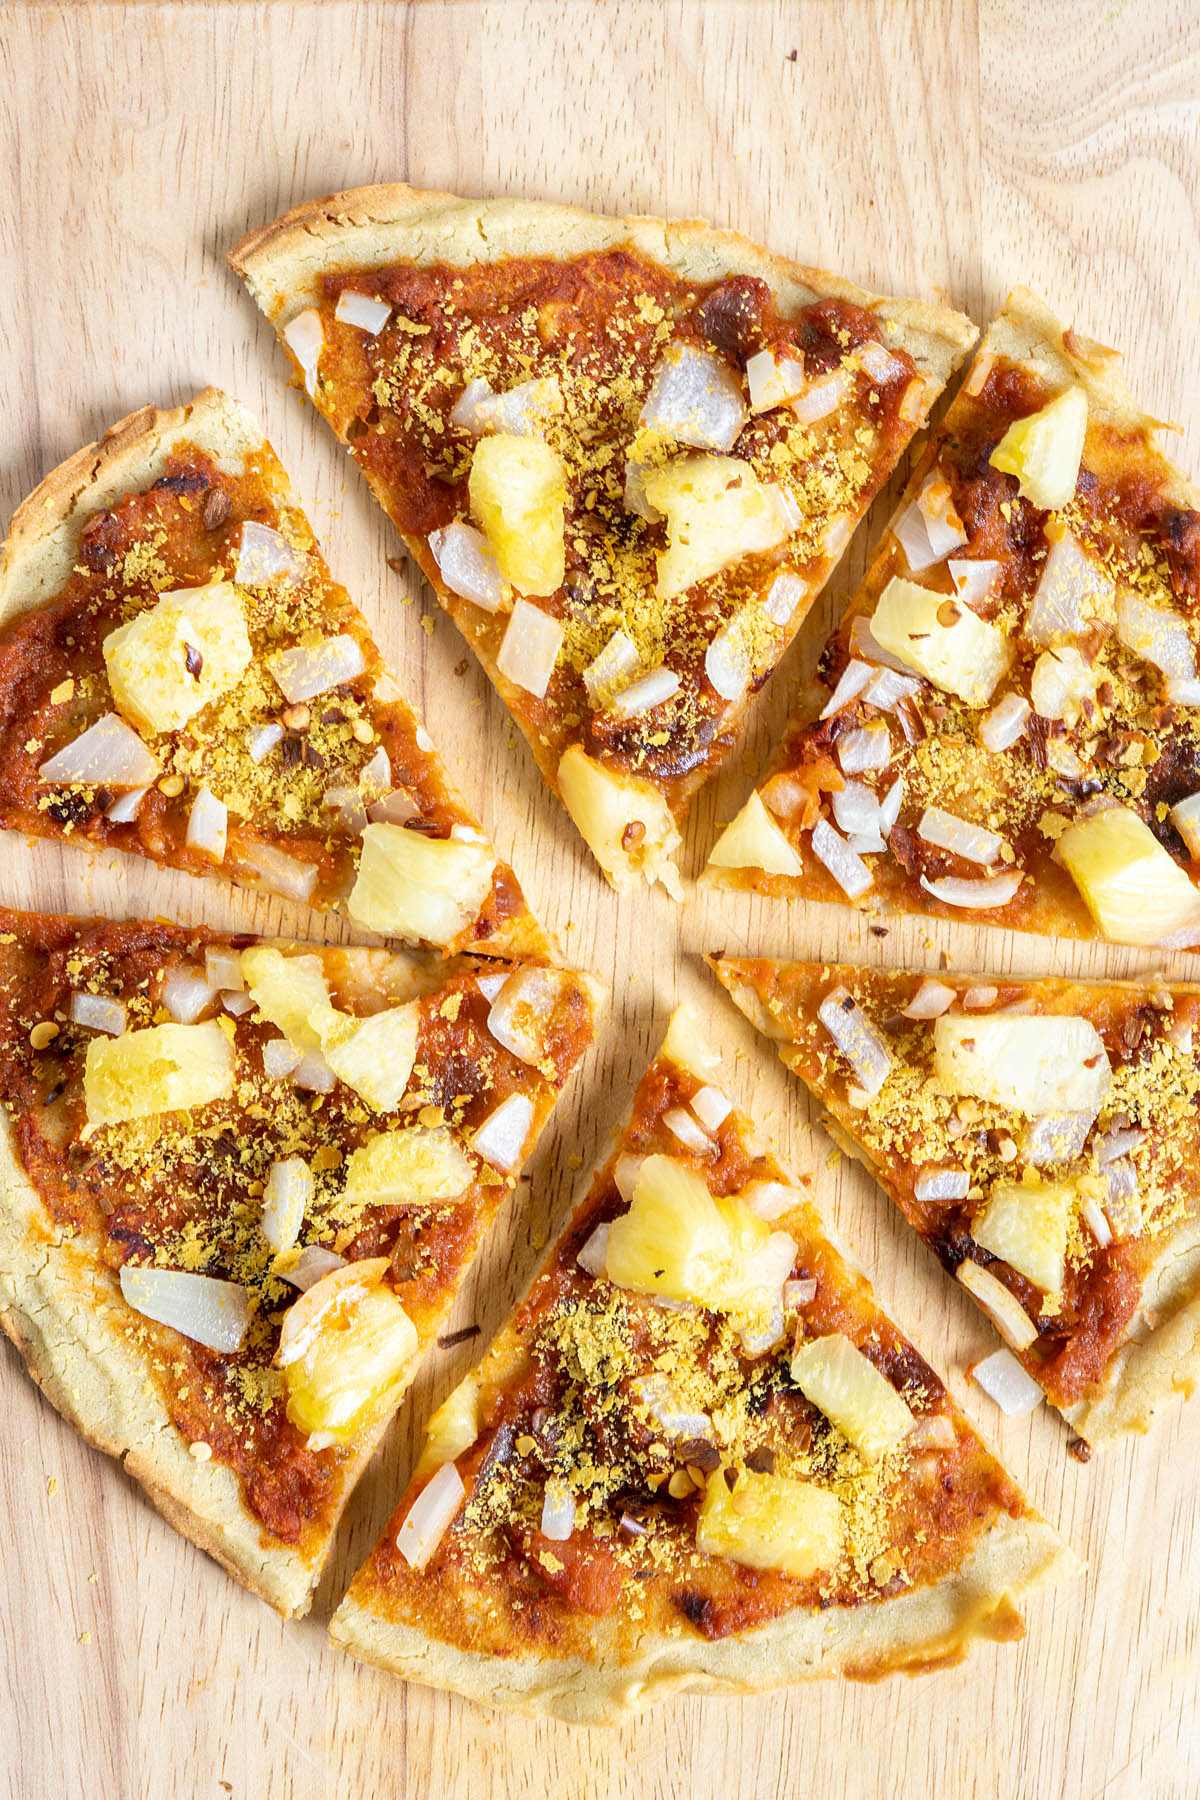 Chipotle Pizza with Pineapple and Onion